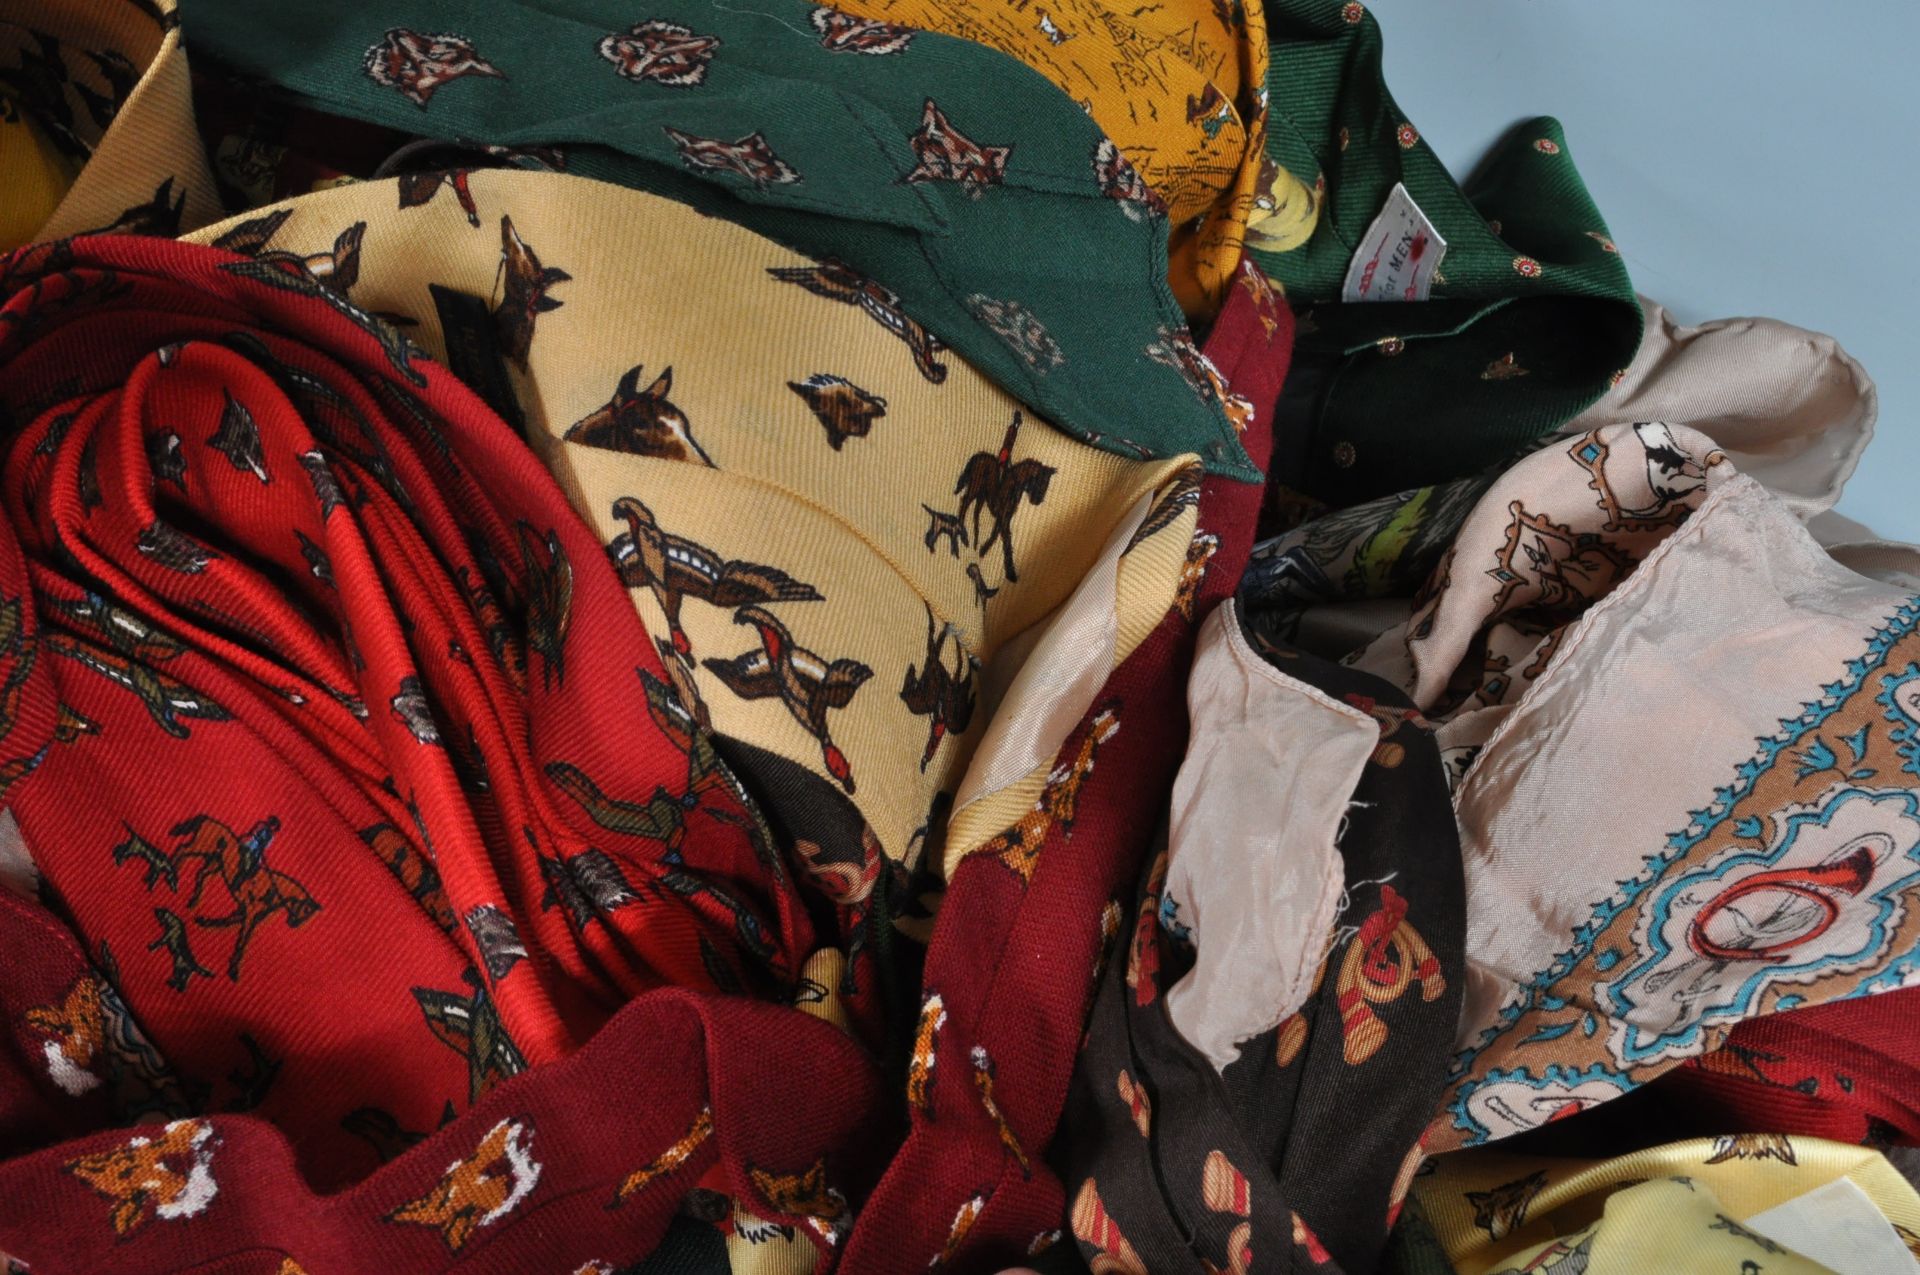 COLLECTION OF VINTAGE 1950S MENS TIES SCARVES AND CRAVATS INCLUDING SEVERAL TOOTAL EXAMPLES. - Image 6 of 8